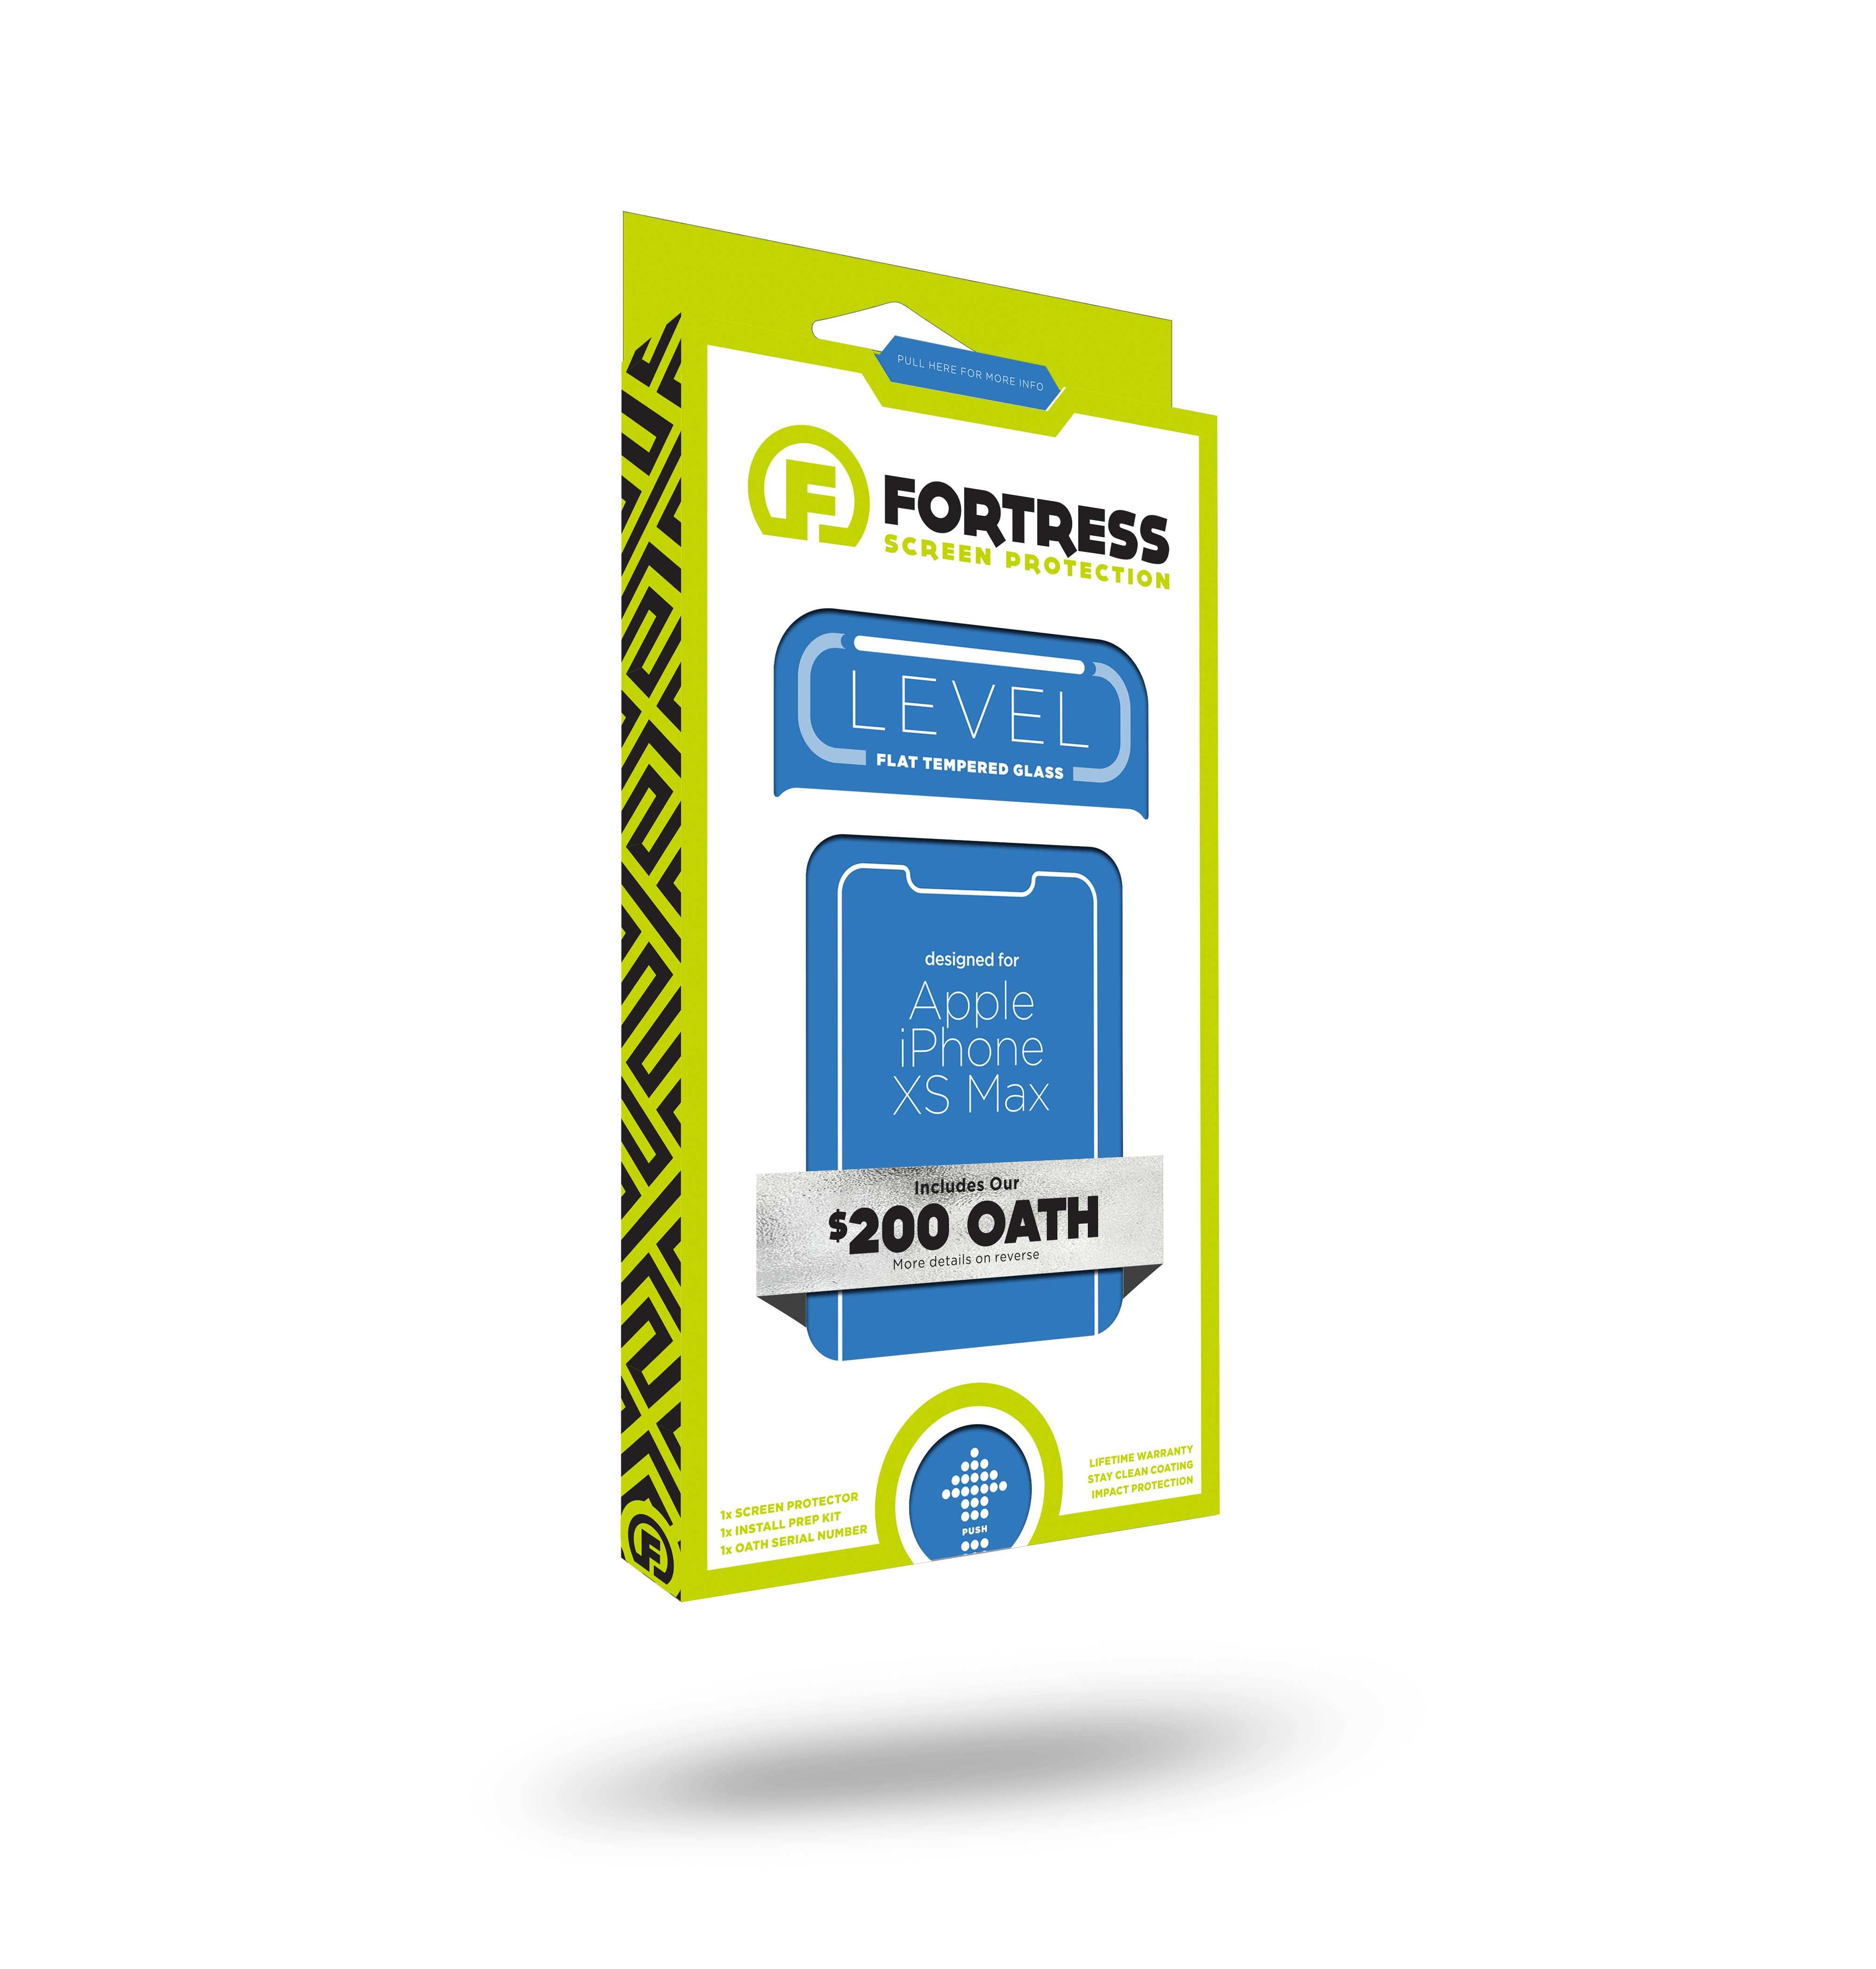 Fortress iPhone 12 Screen Protector - $200 Device Coverage  Scooch Screen Protector